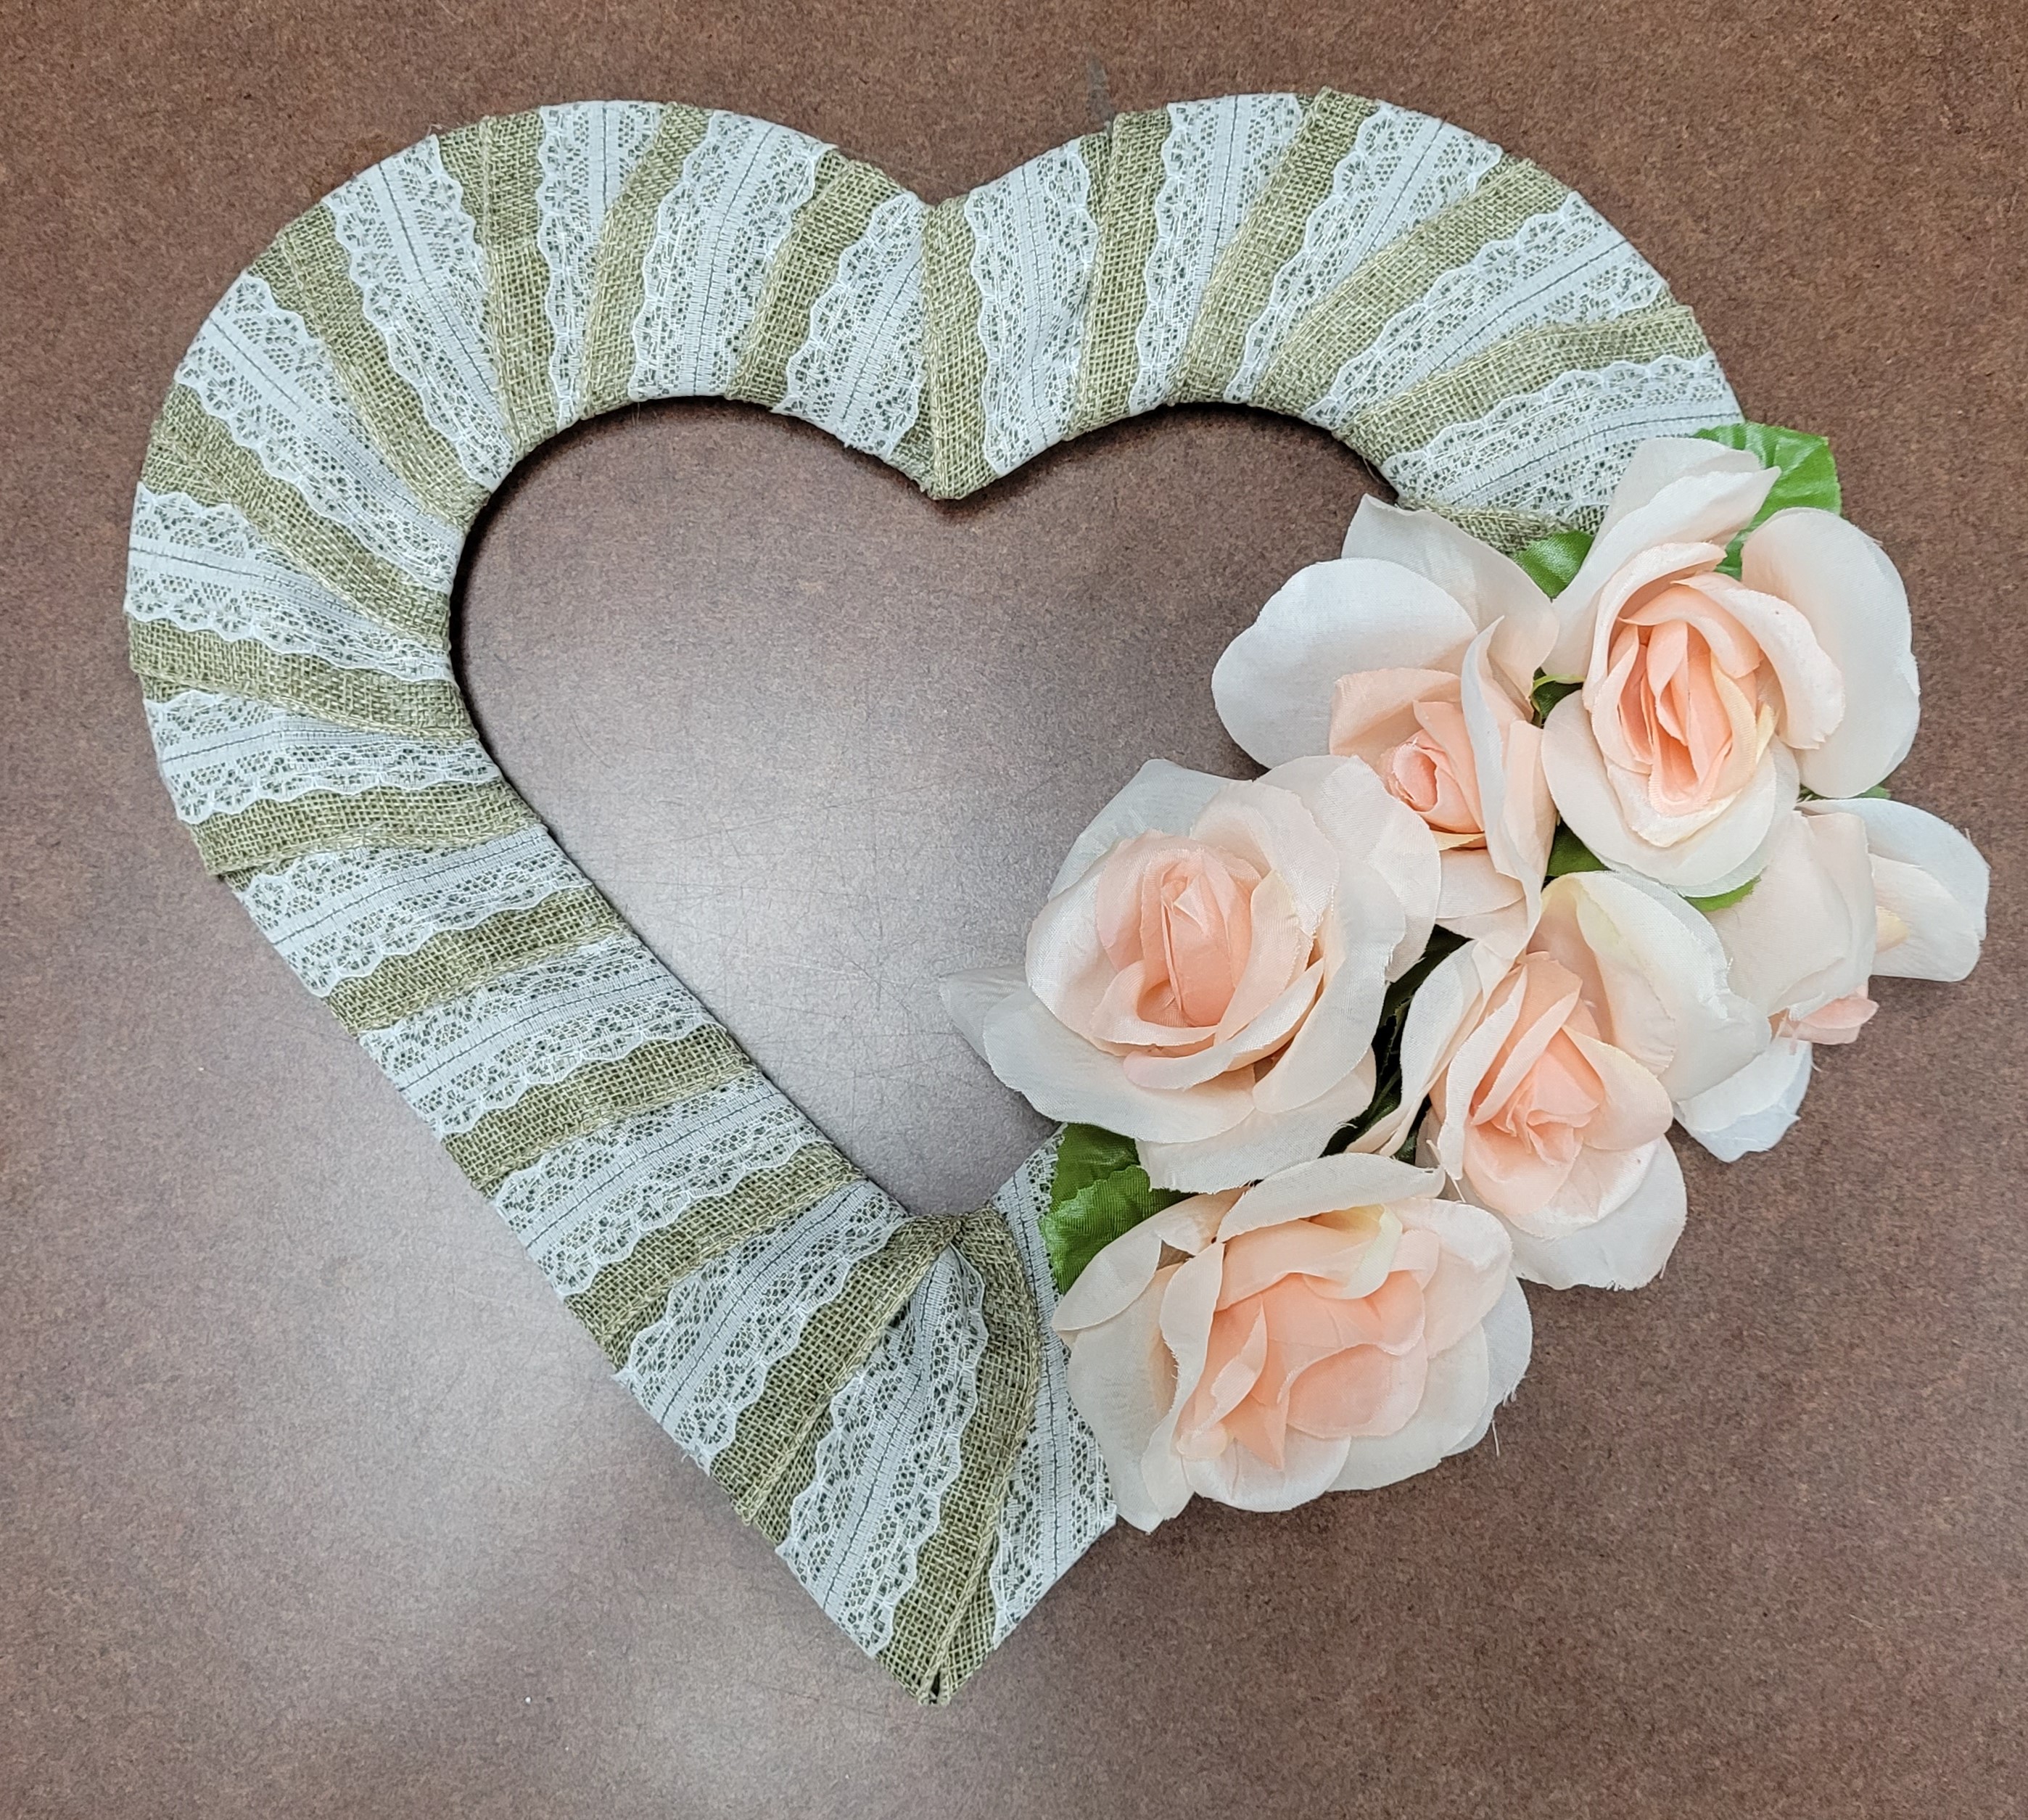 heart shaped wreath wrapped with lace burlap and adorned with flowers